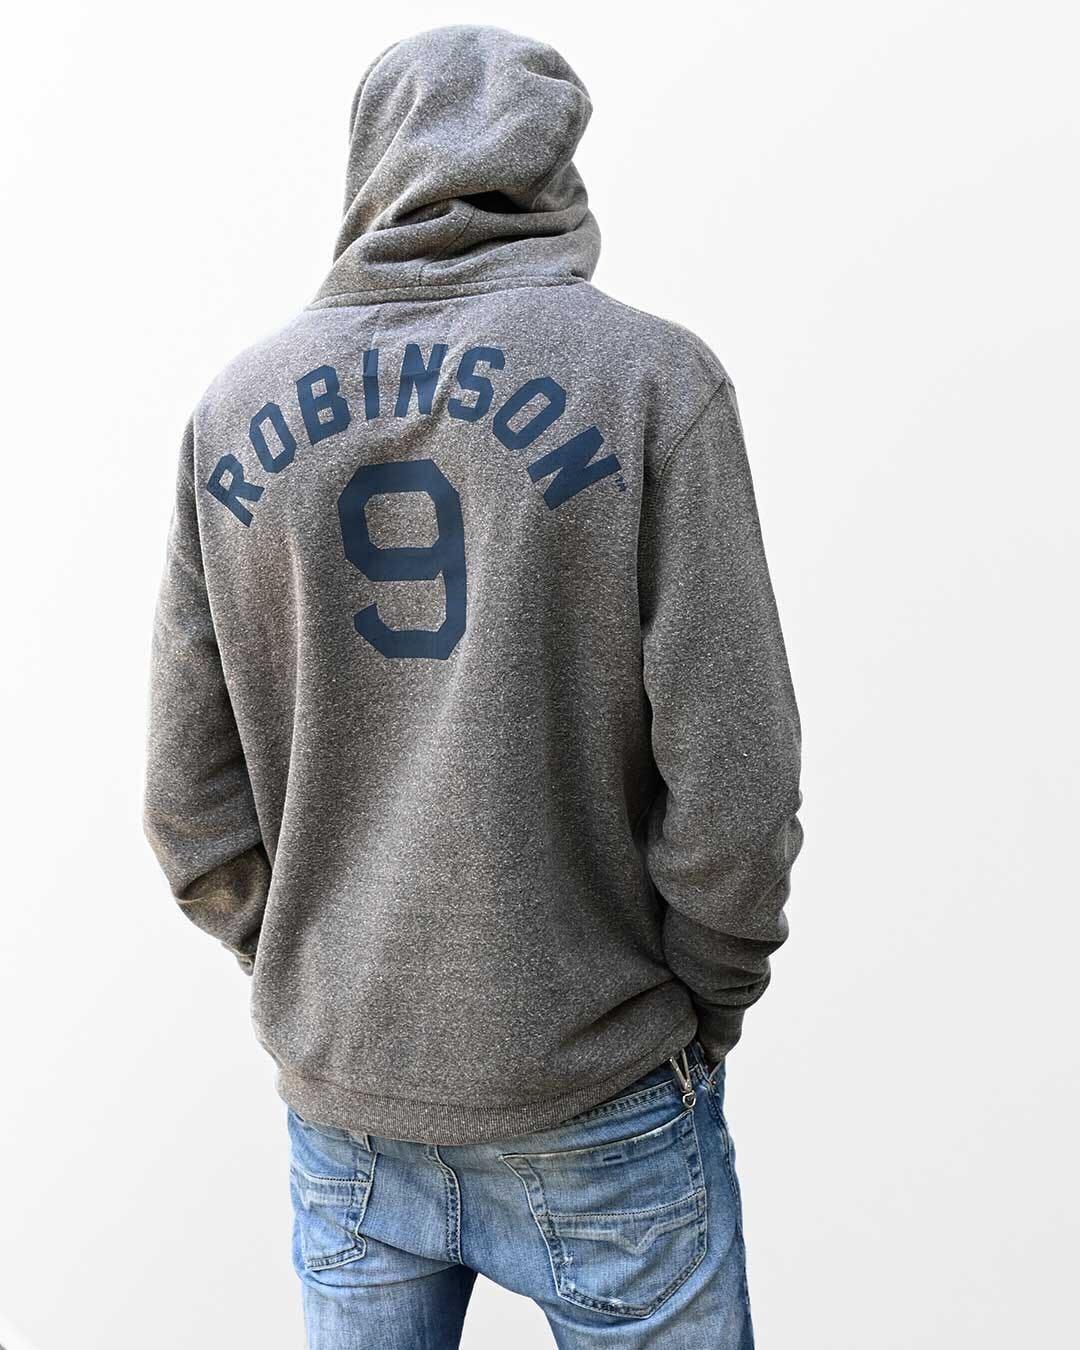 Jackie Robinson Montreal '46 Grey Hoody - Roots of Fight Canada